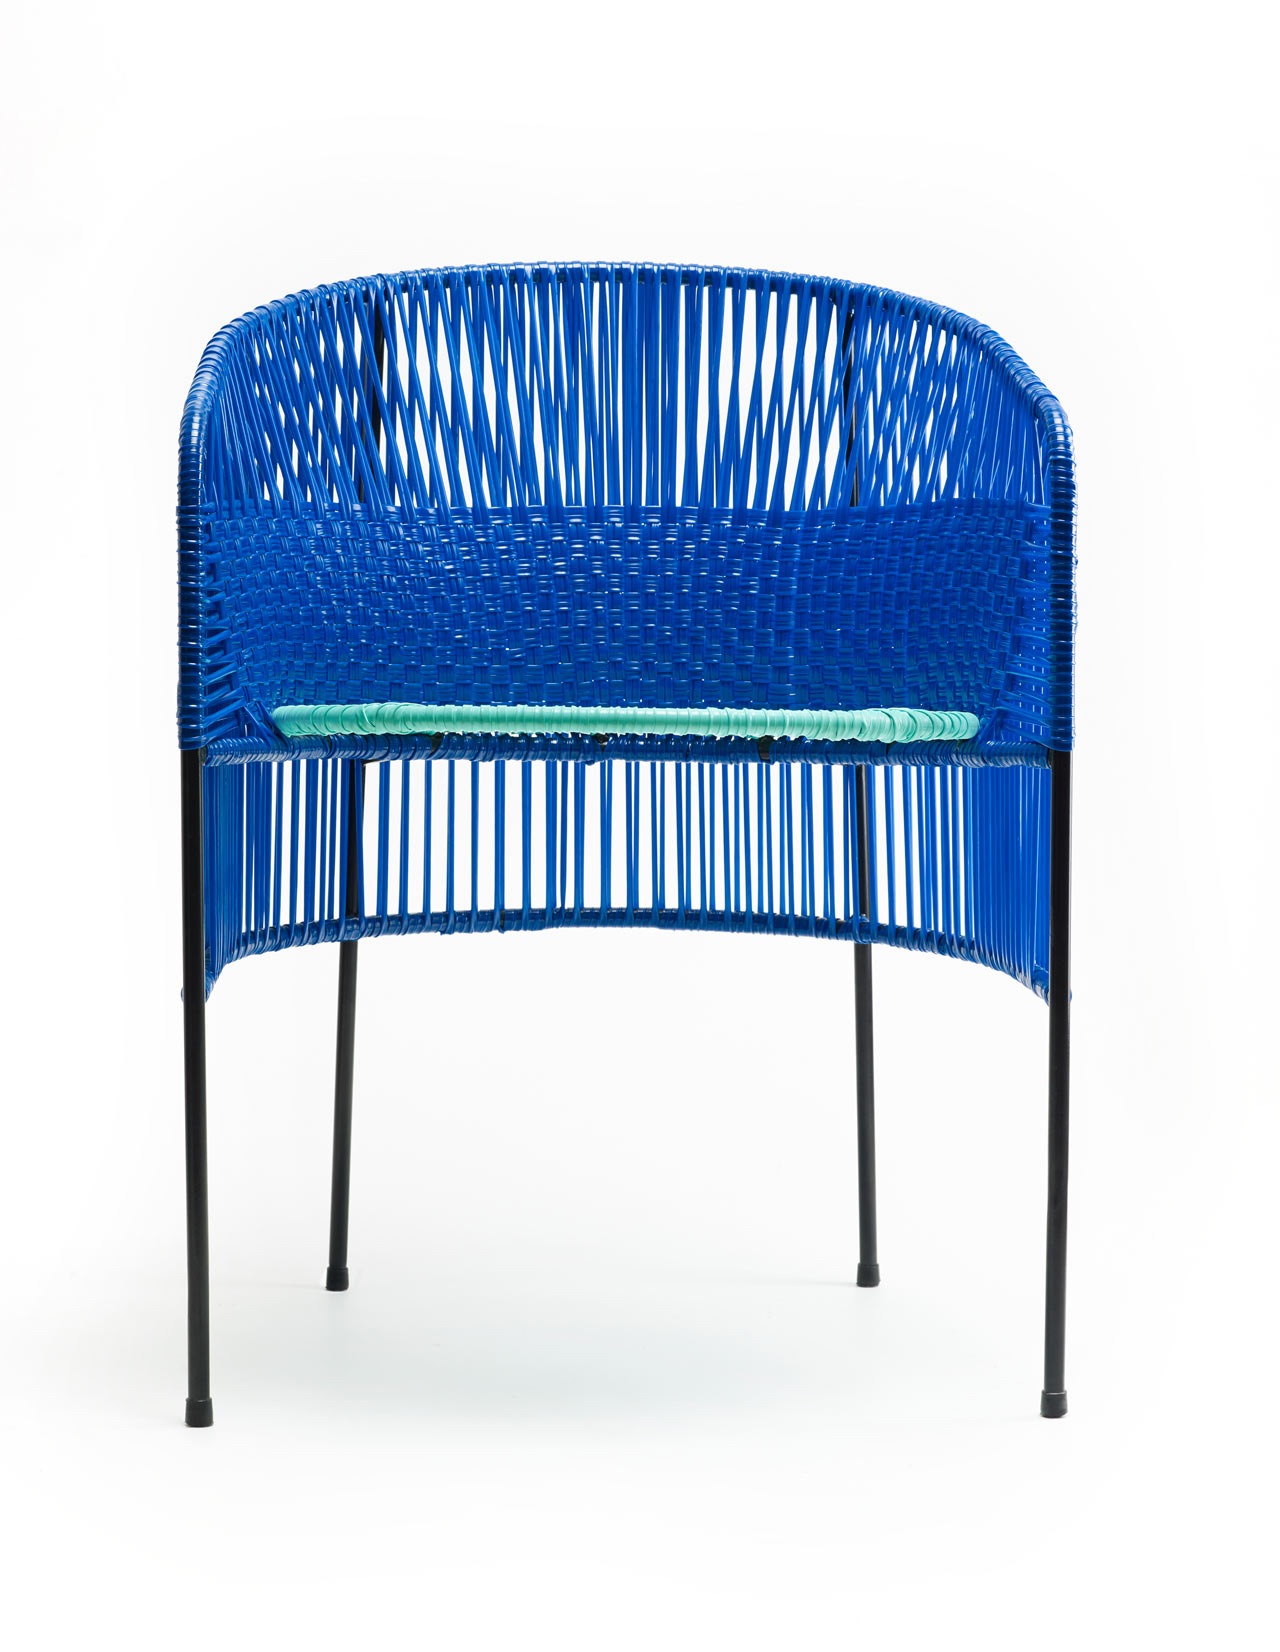 ames Launches CARIBE, a Colorful Outdoor Collection Made of Recycled Plastic-5